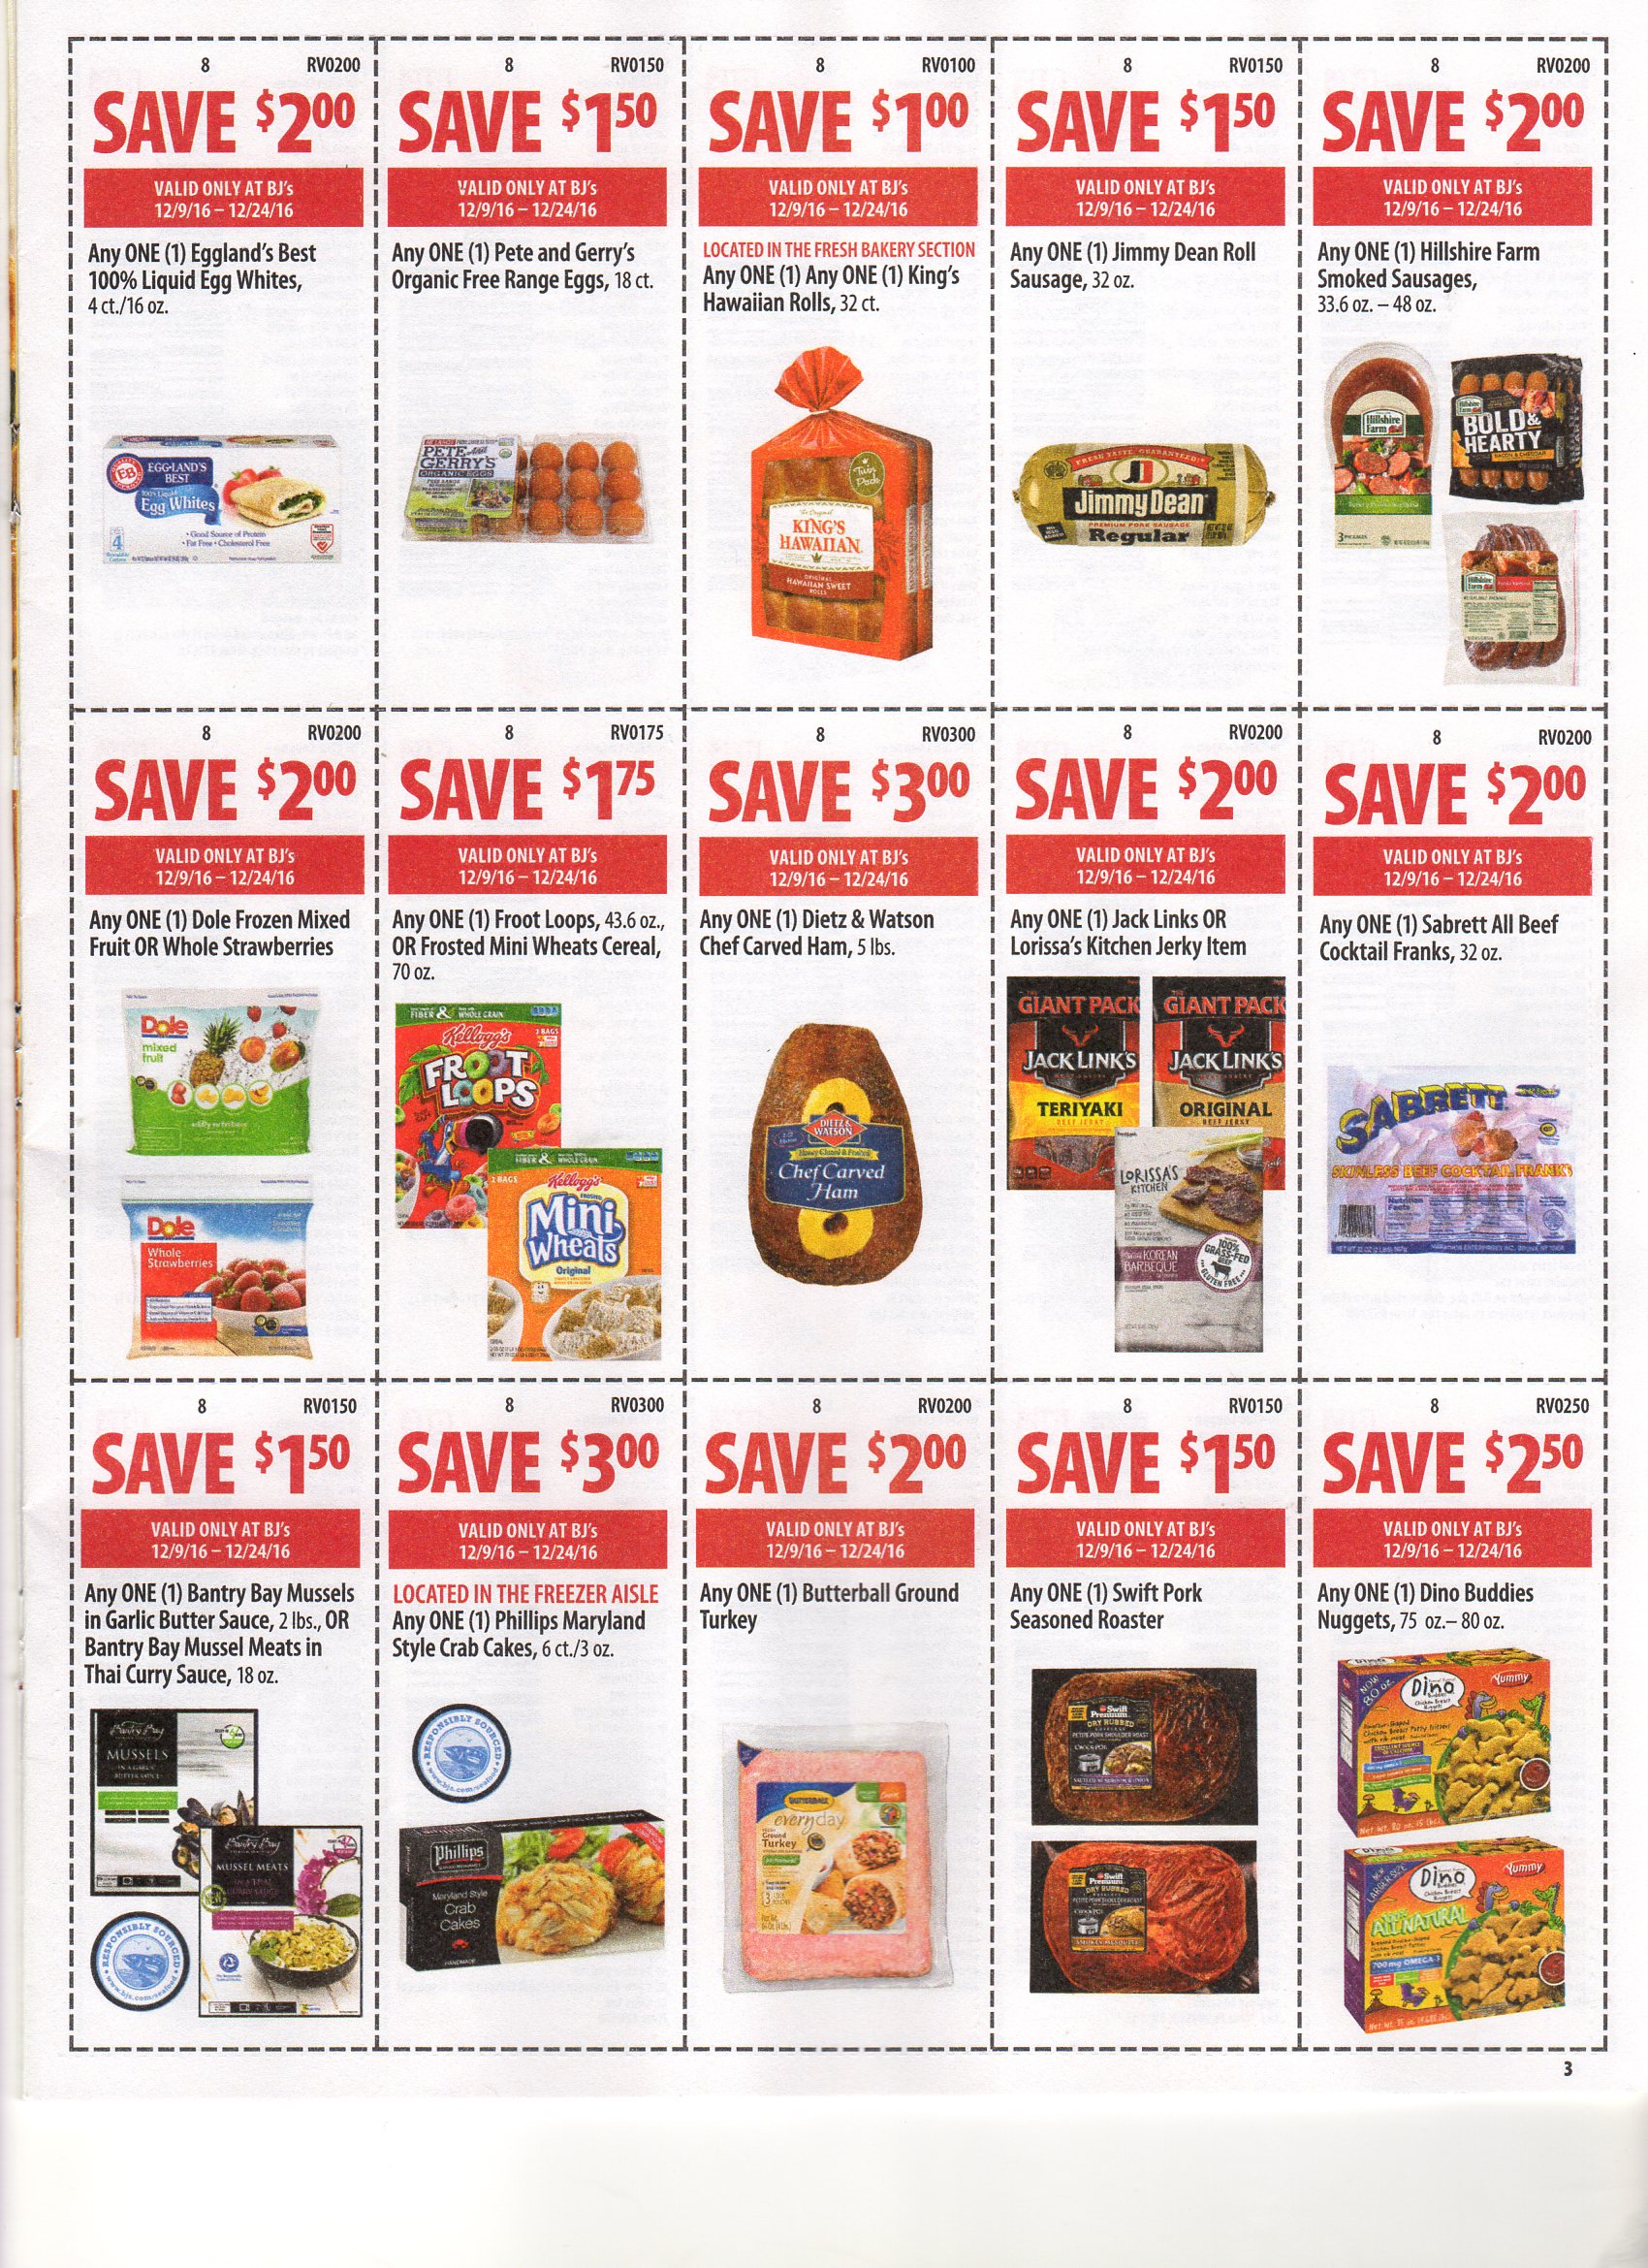 BJ's Front of Club Coupon Matchups & Scan 12/912/24 My BJs Wholesale